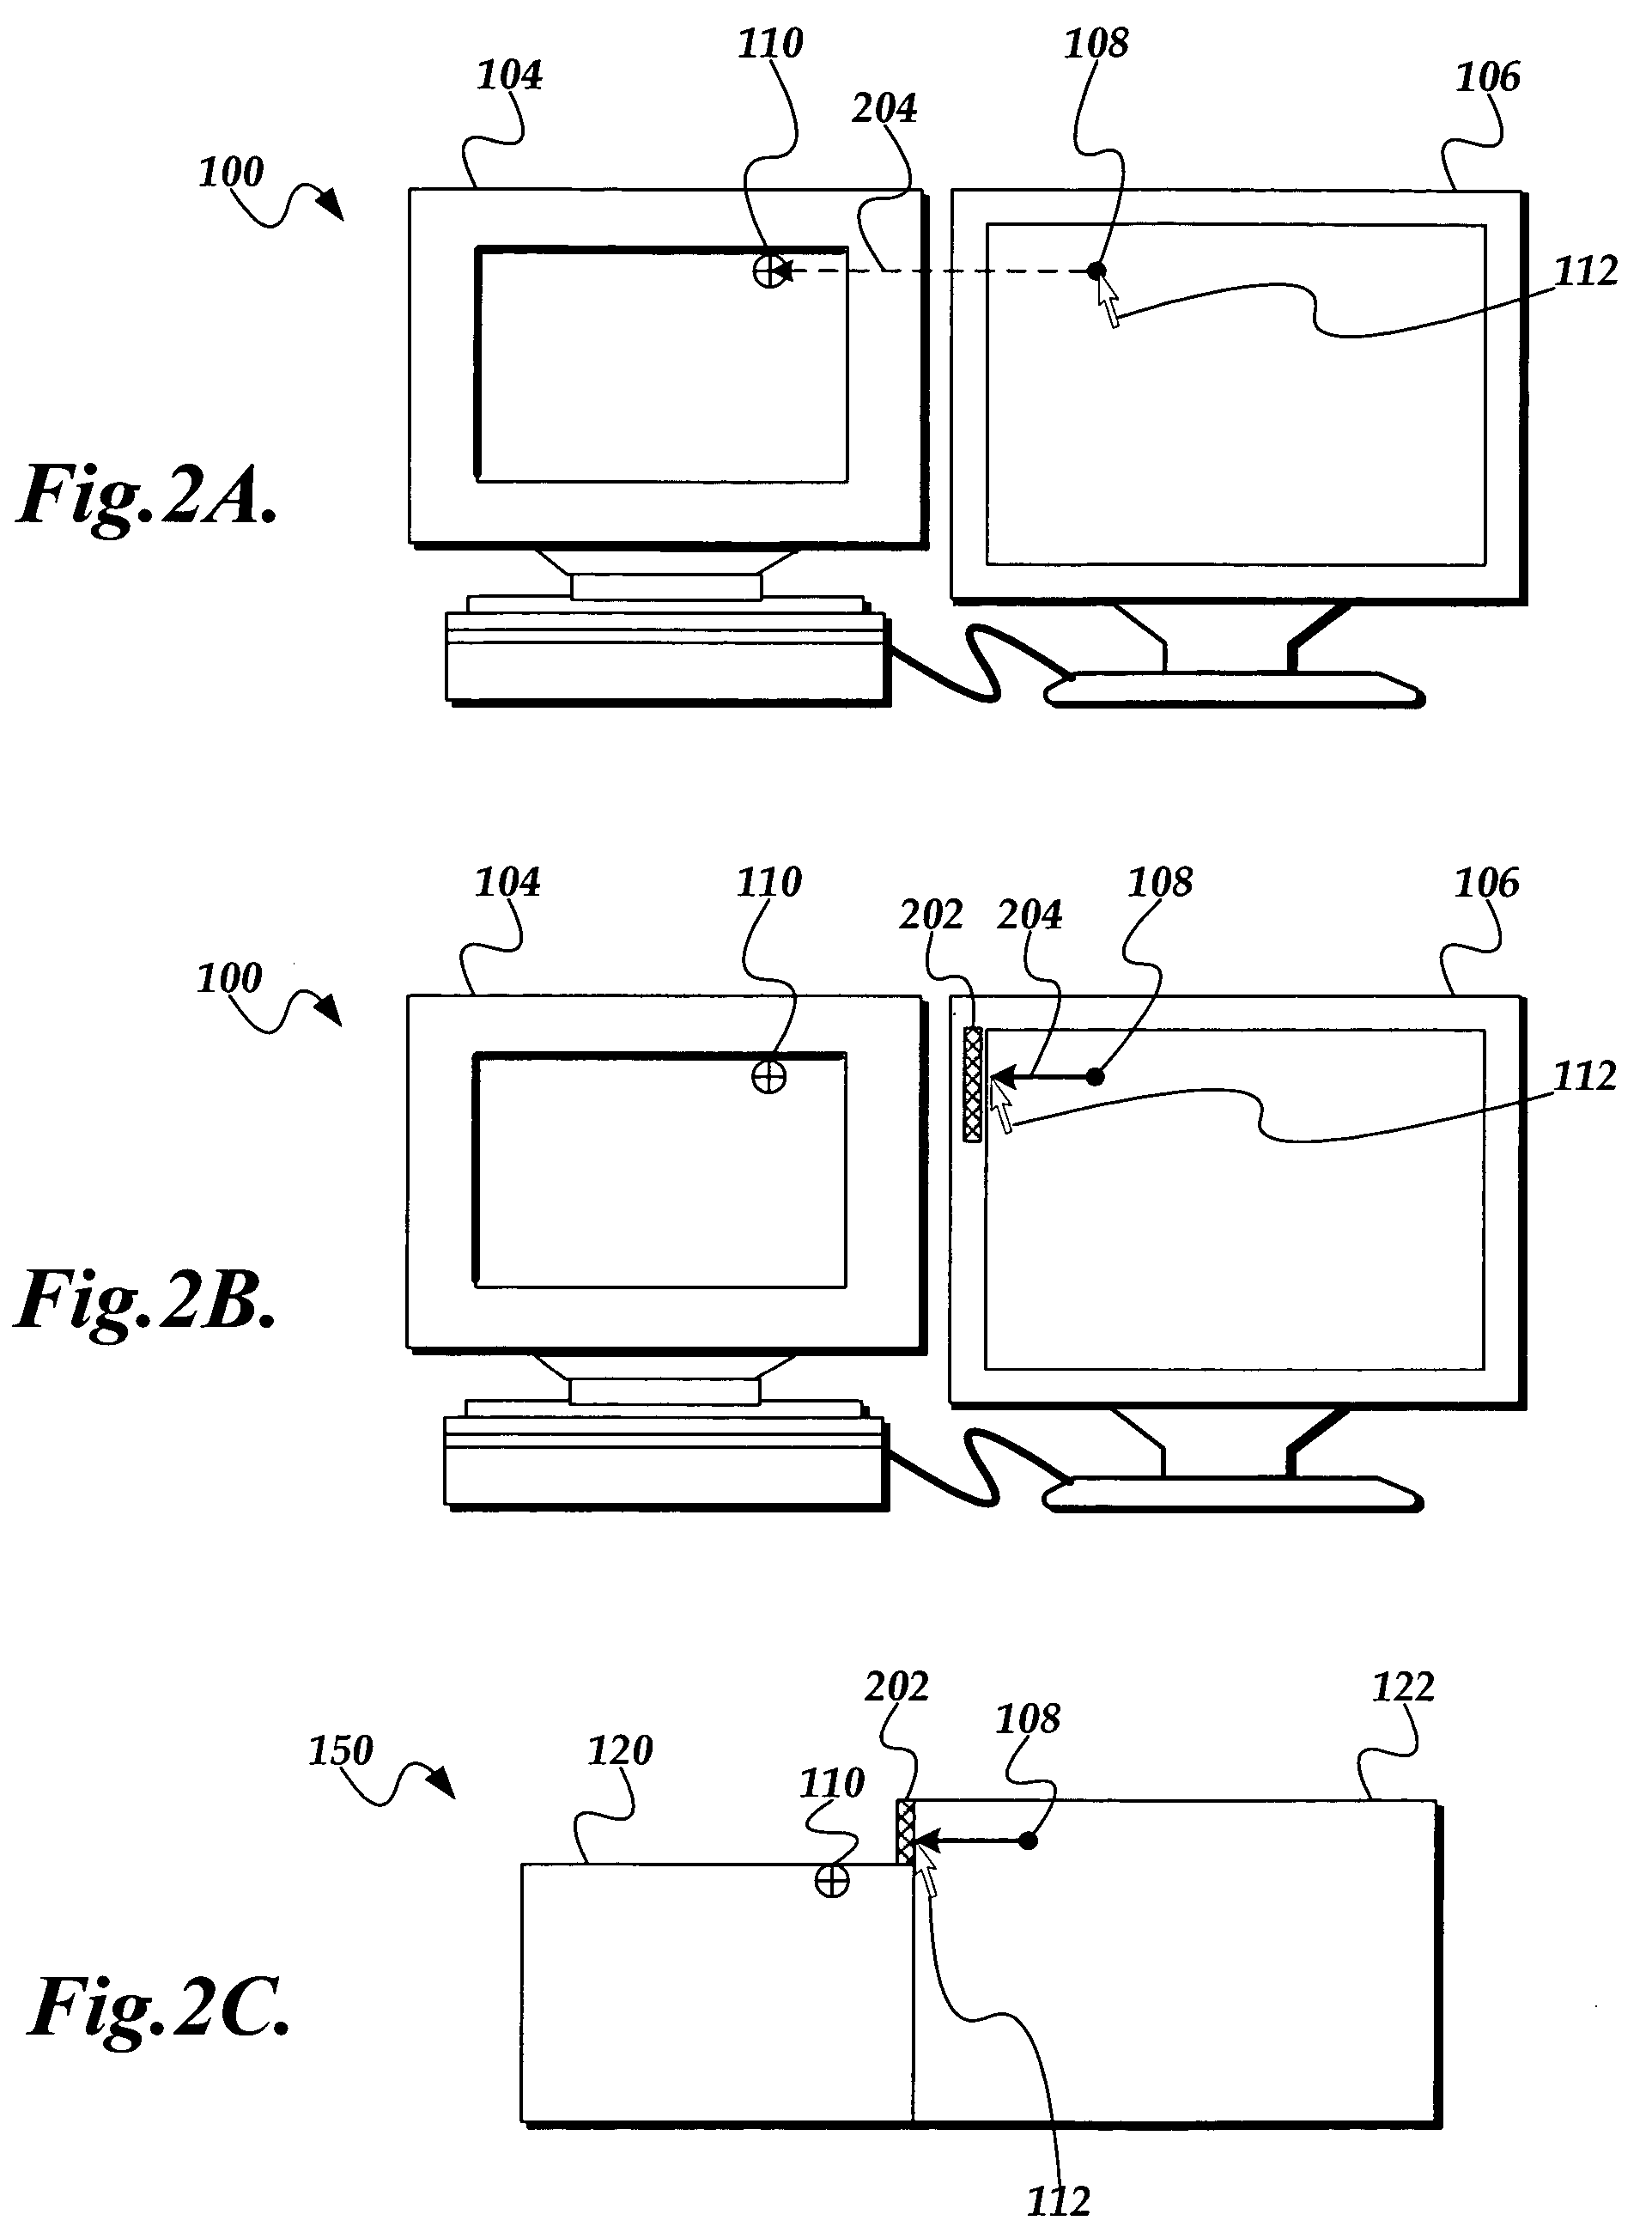 Displaying visually correct pointer movements on a multi-monitor display system